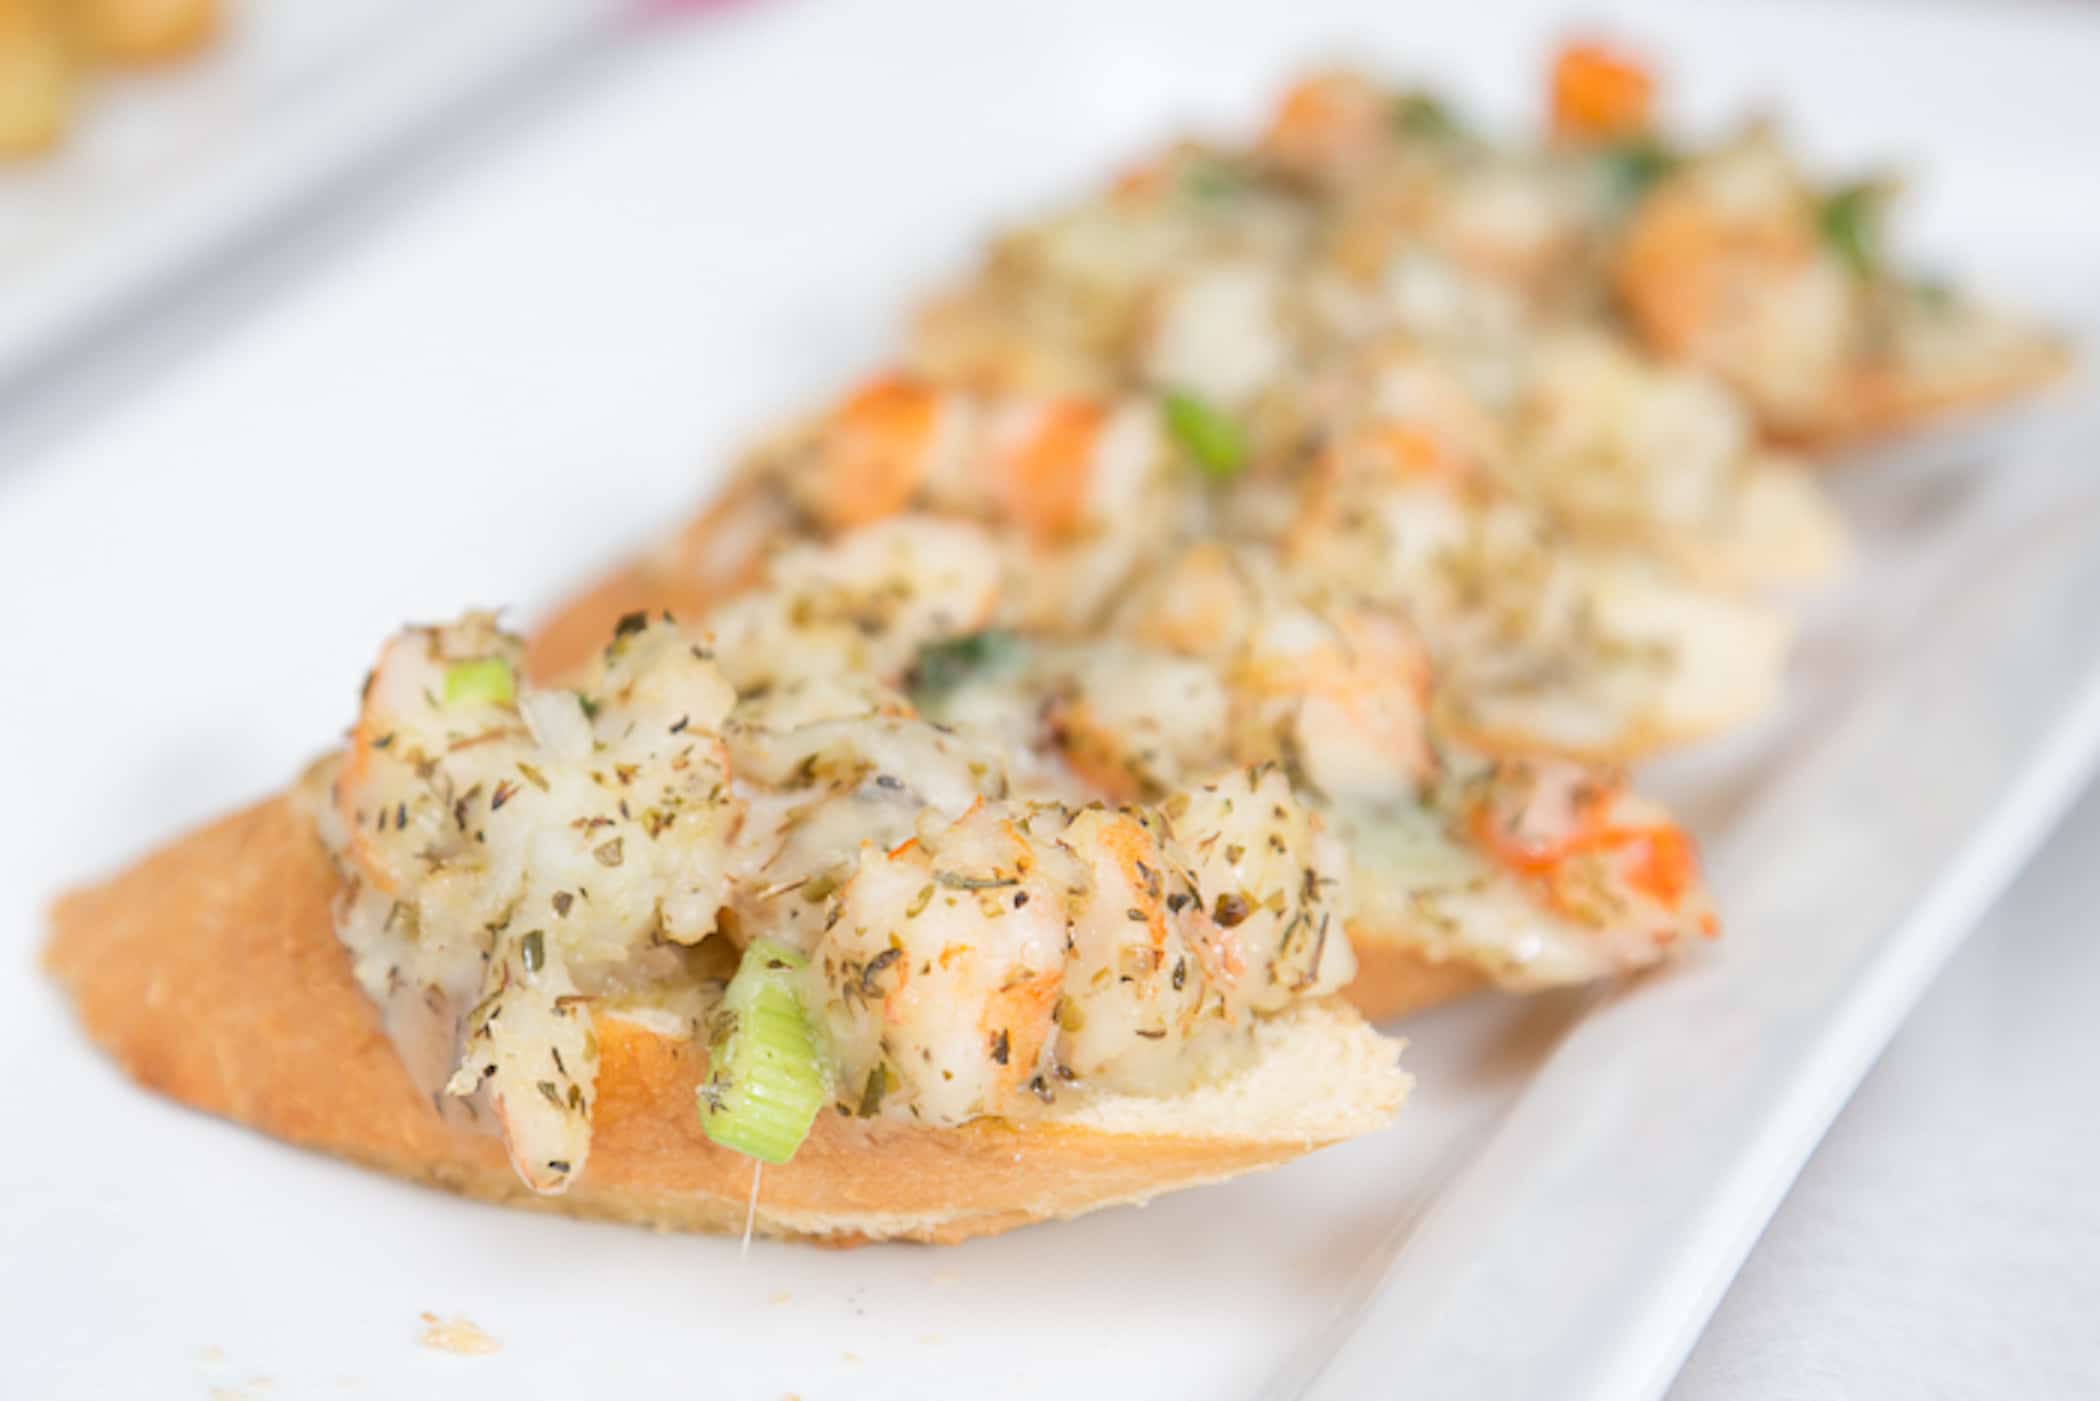 Fresh shrimp seasoned with garlic and fresh herbs teamed with Mozzarella cheese and served warm on a sliced French baguette.